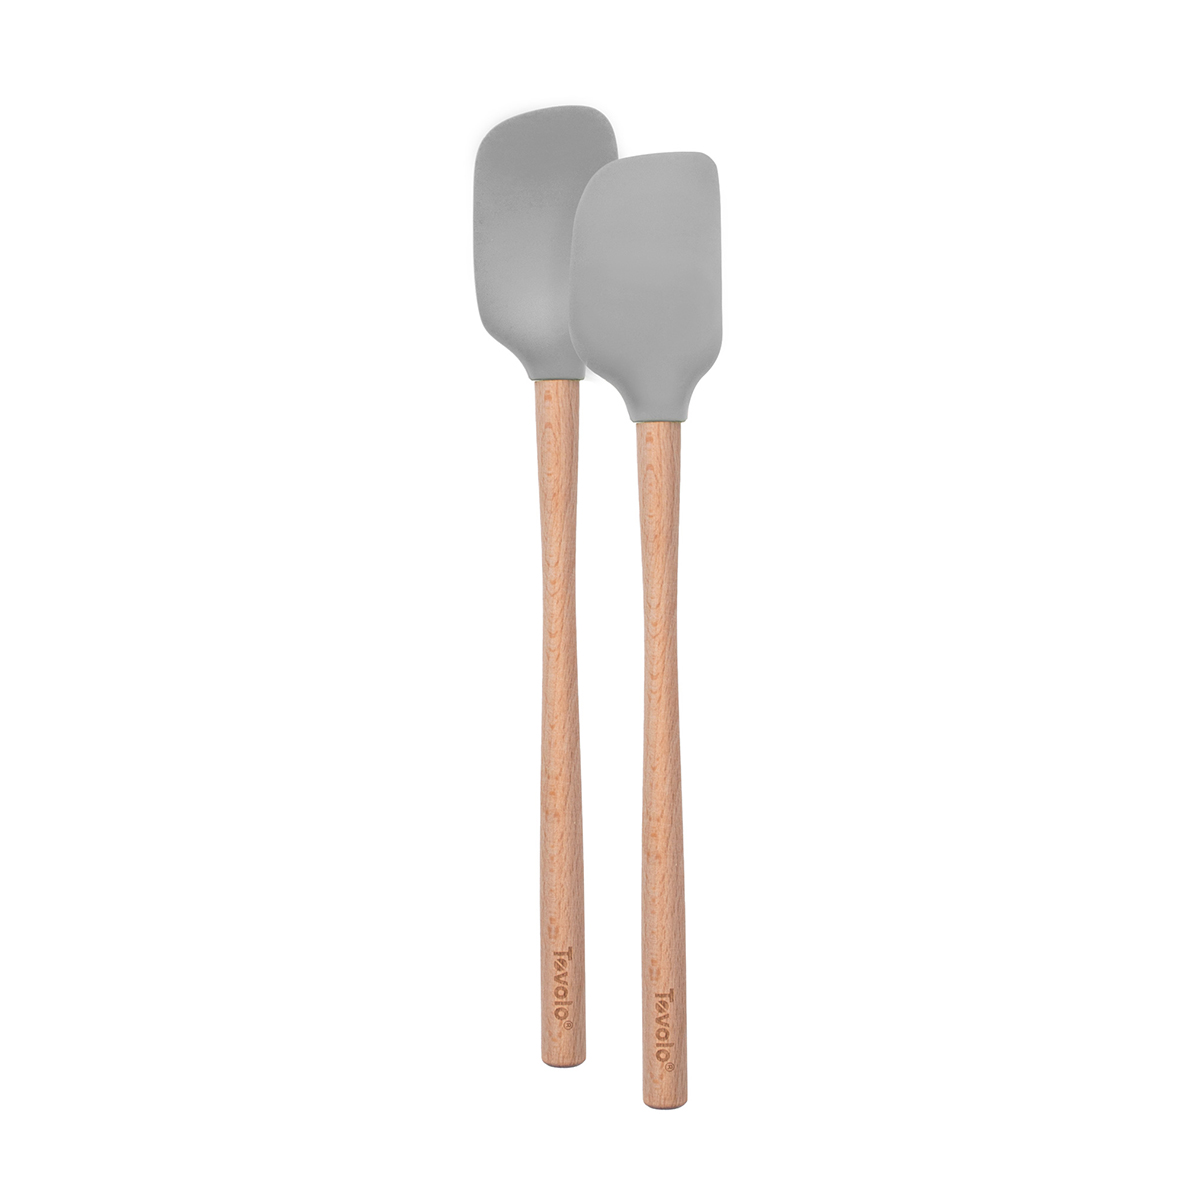 https://www.containerstore.com/catalogimages/423665/10086202-Flex-Core-Wood-Handled-S2-M.jpg